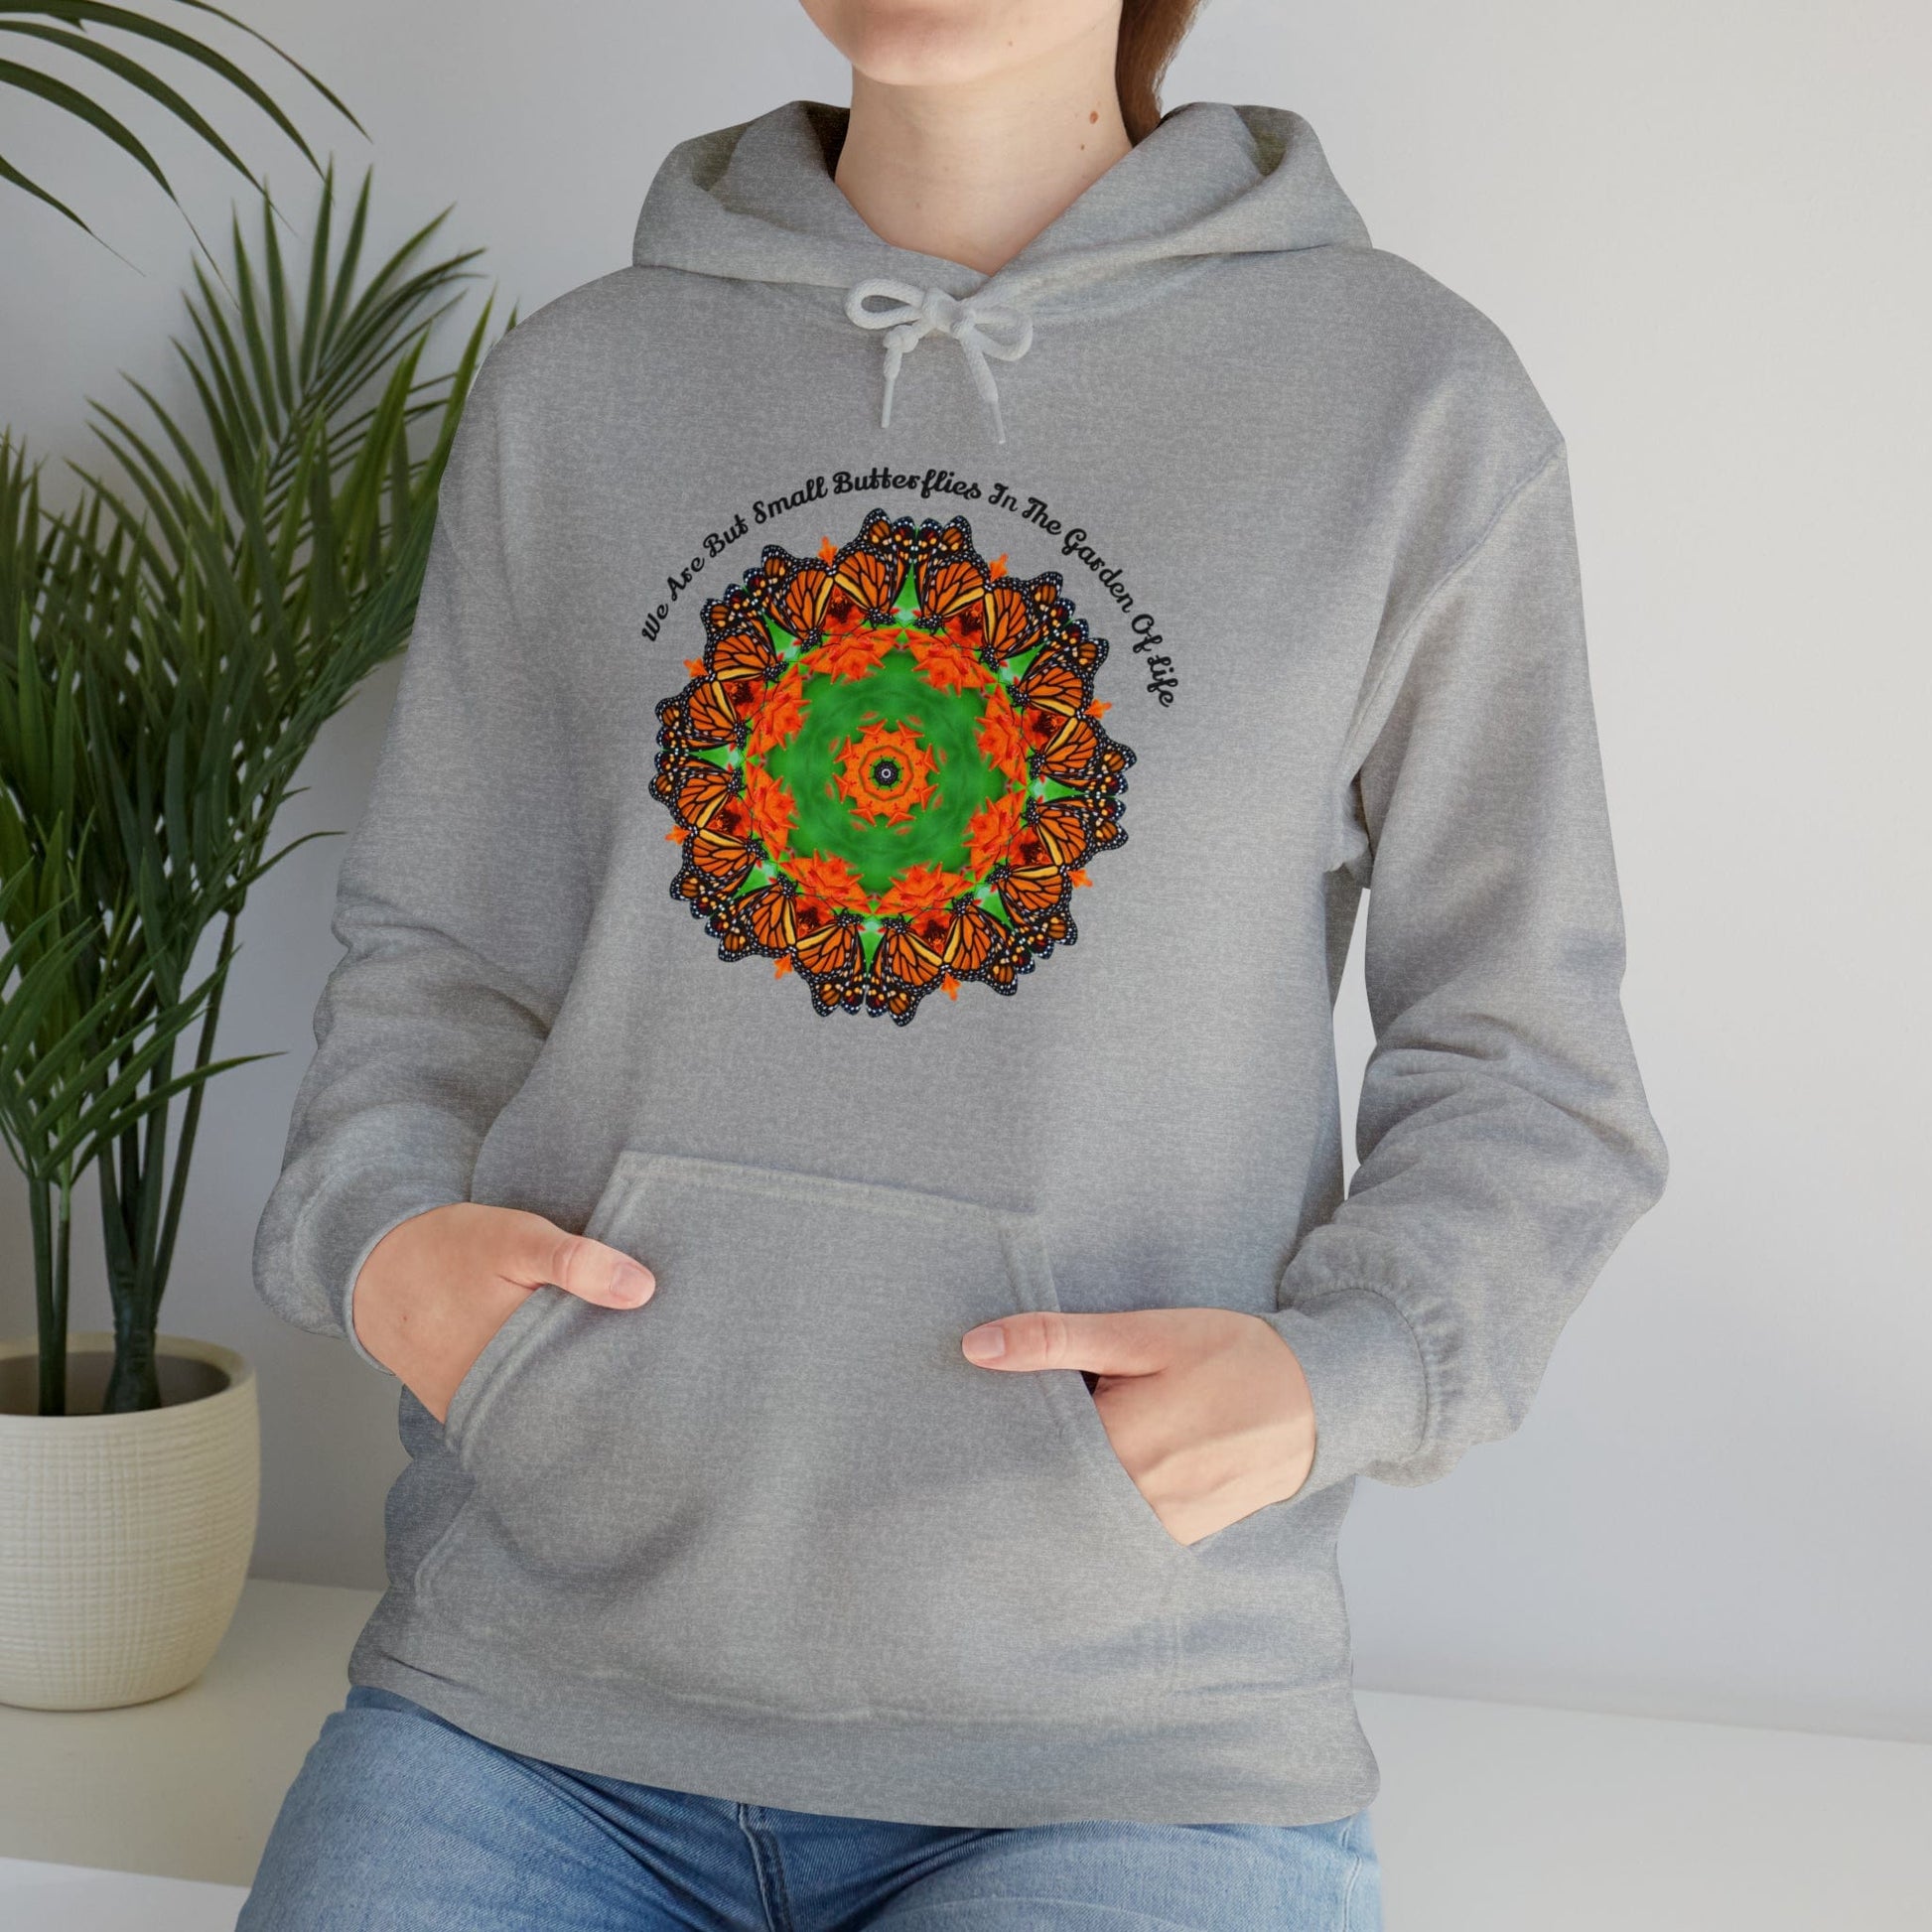 Pretty & Cute Butterfly Motivational Graphic Hoodie Sweatshirt Monarch Butterfly Mandala Art We Are But Small Butterflies In The Garden Of Life Sports Grey